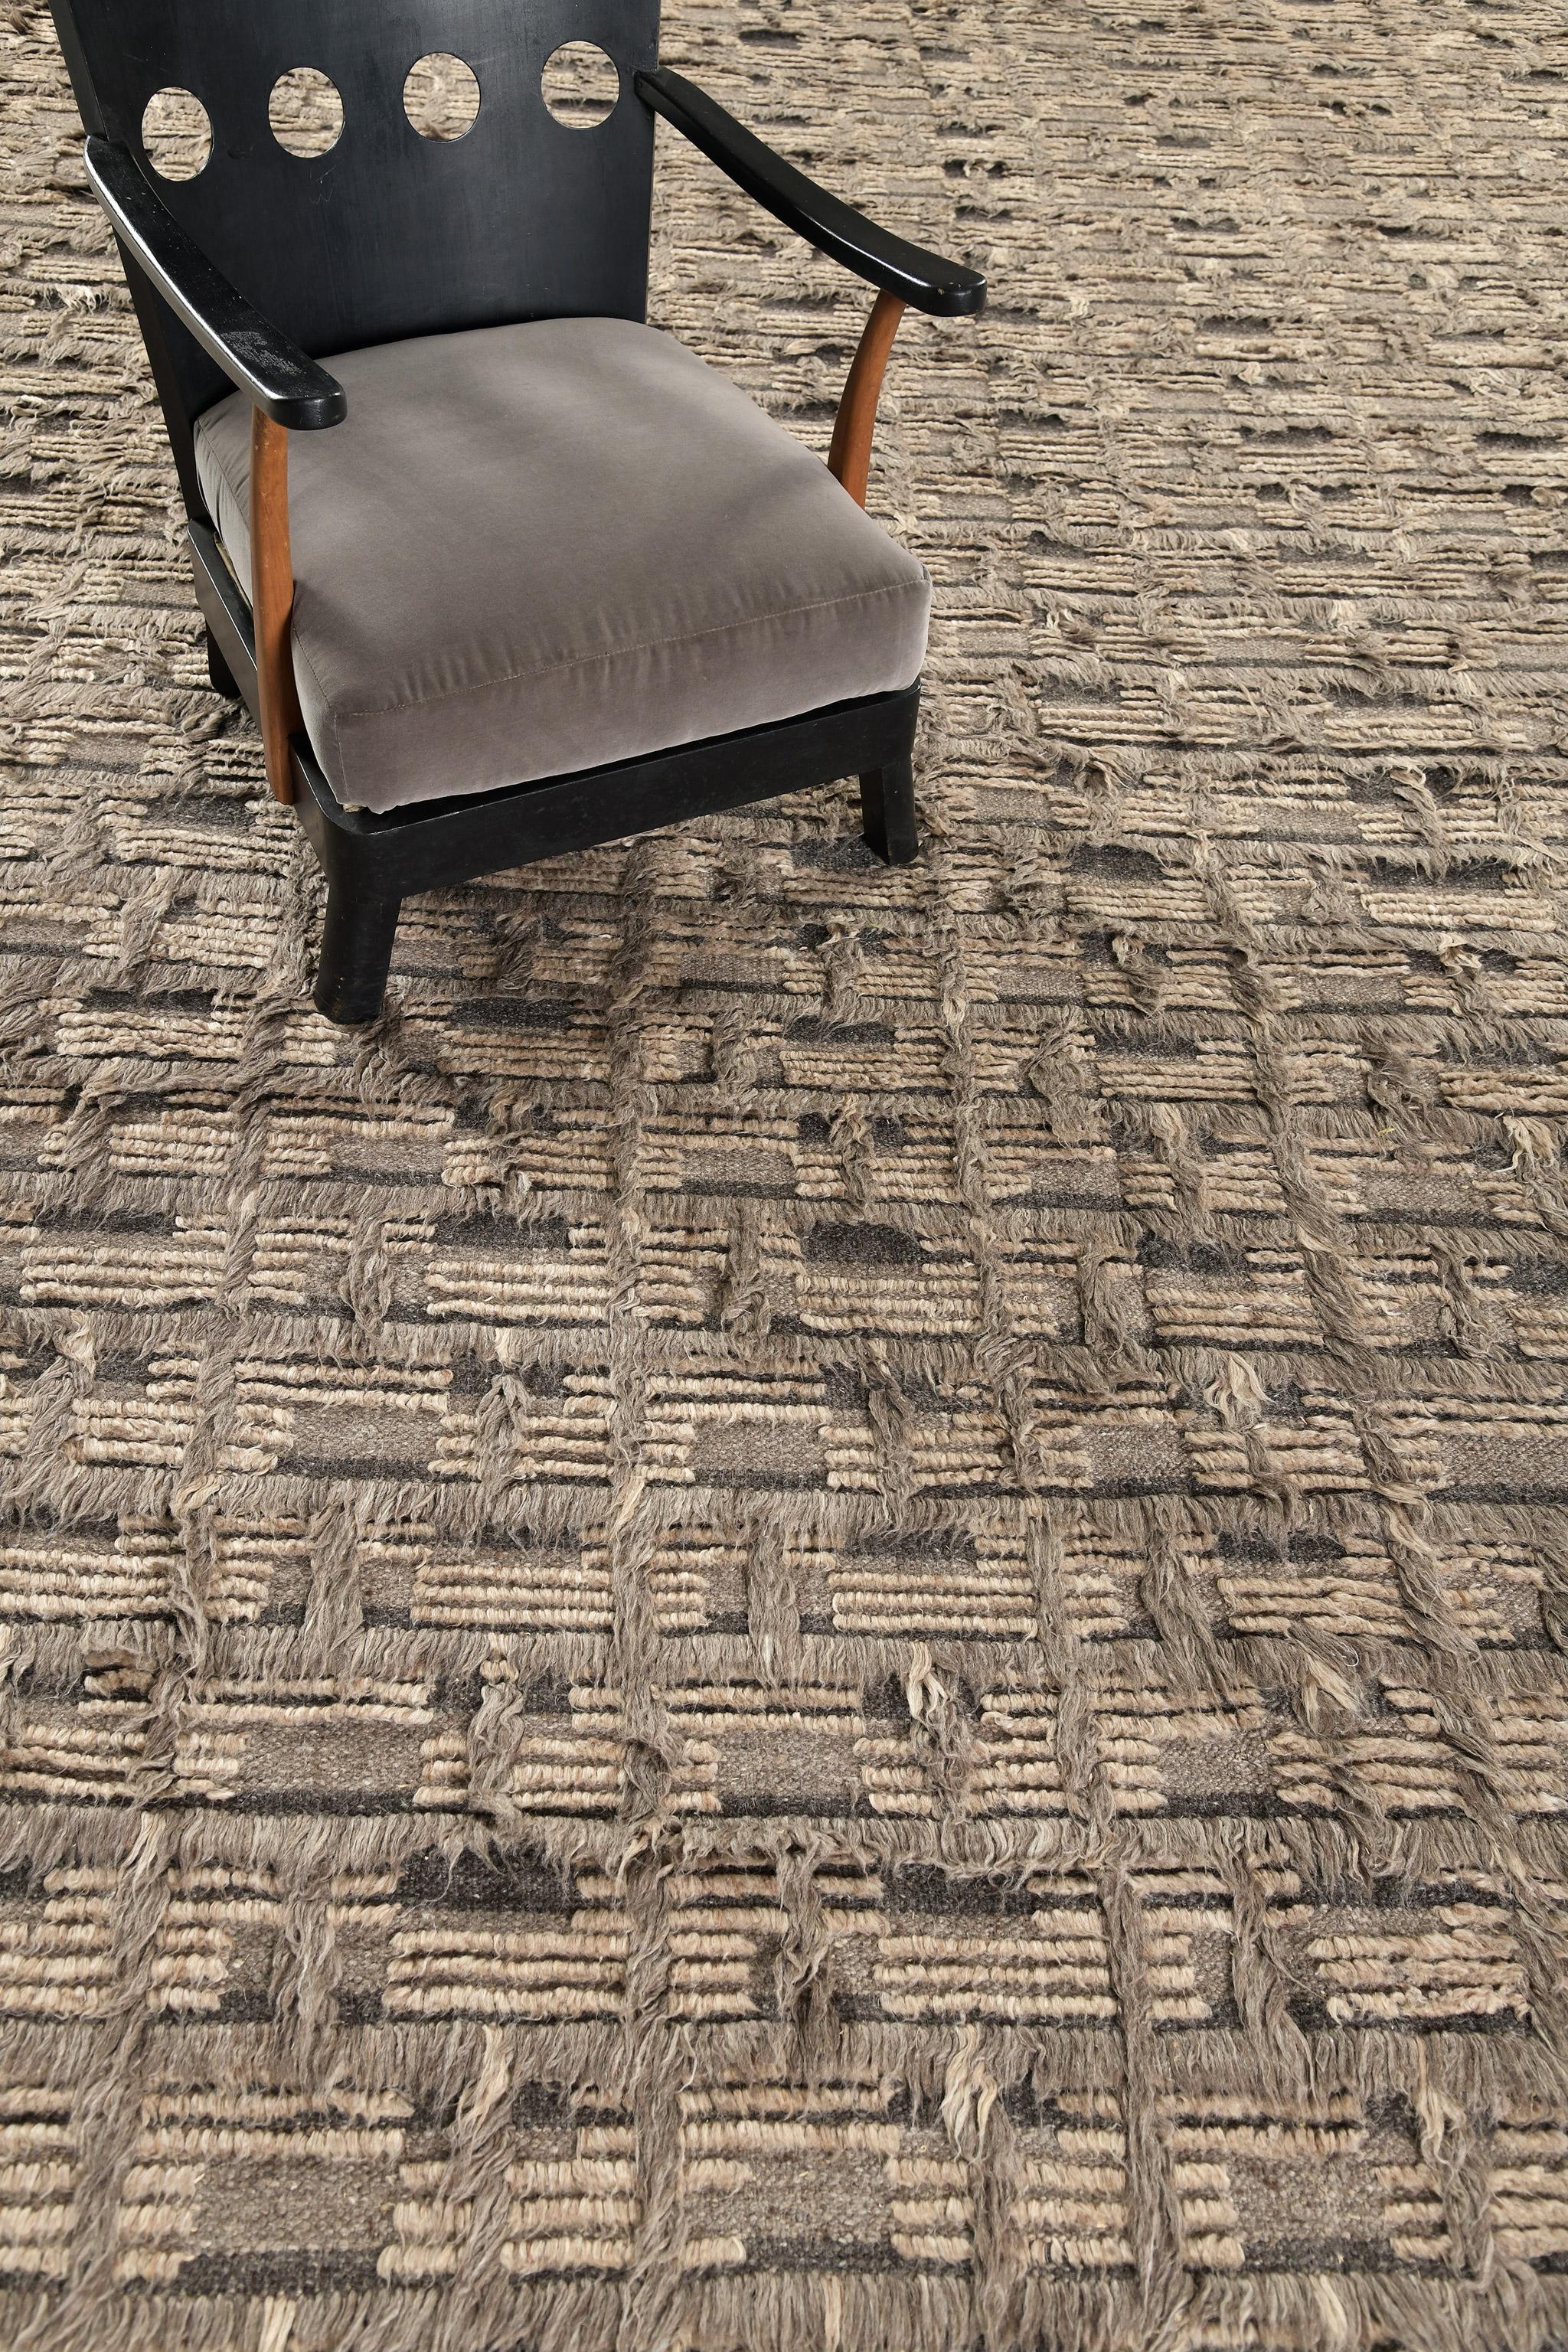 Imana is an intricate syncopated motif of long and short pile punctuated by squares of open flatweave in banded tones. Imana is available in two colorways, with custom options available.  This piece features colors of mulled cacao on a striped